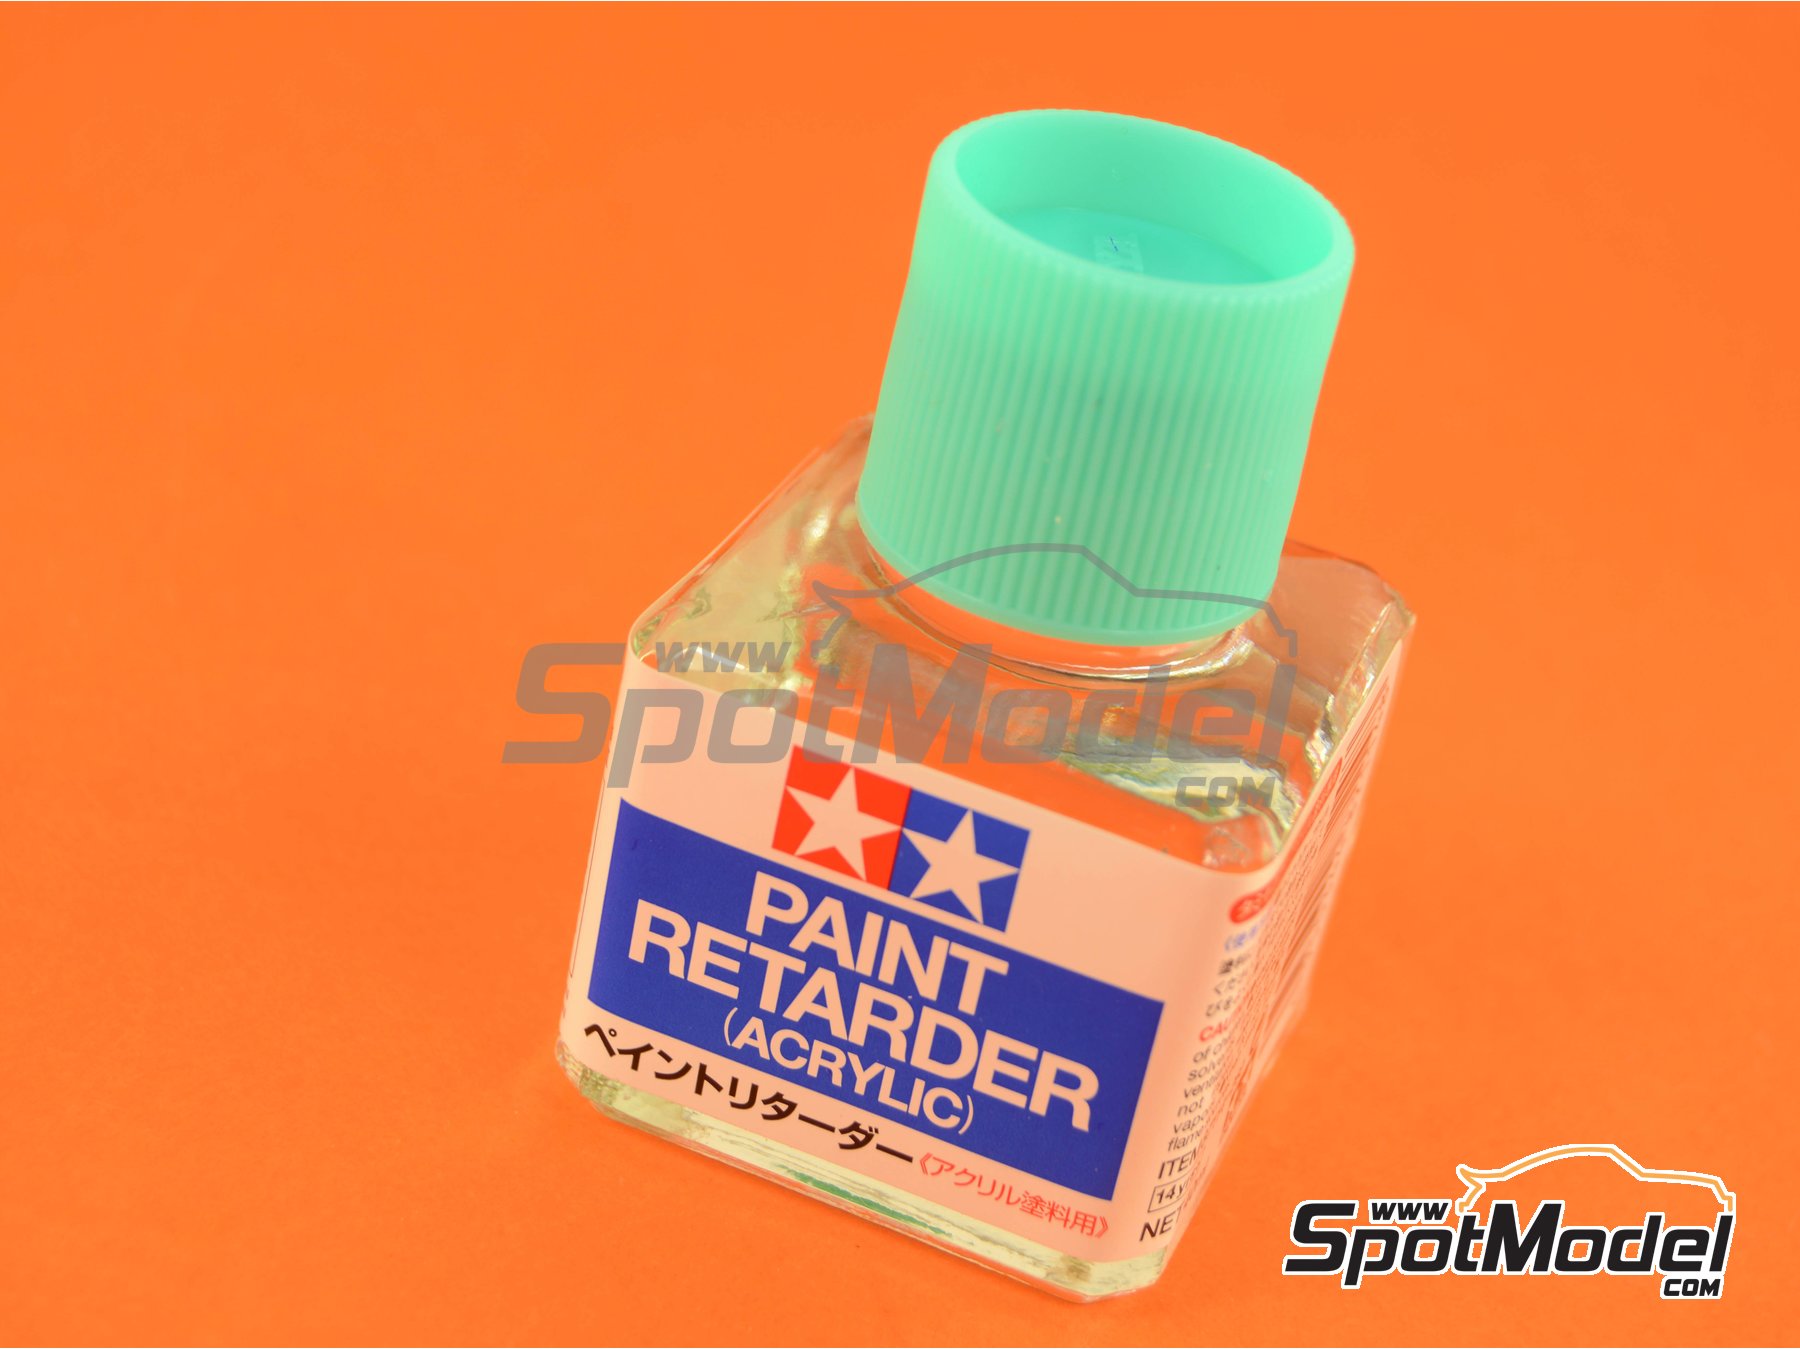 Paint Retarder Acrylic - 1 x 40ml. Additive manufactured by Tamiya (ref.  TAM87114, also 4950344871148 and 87114)